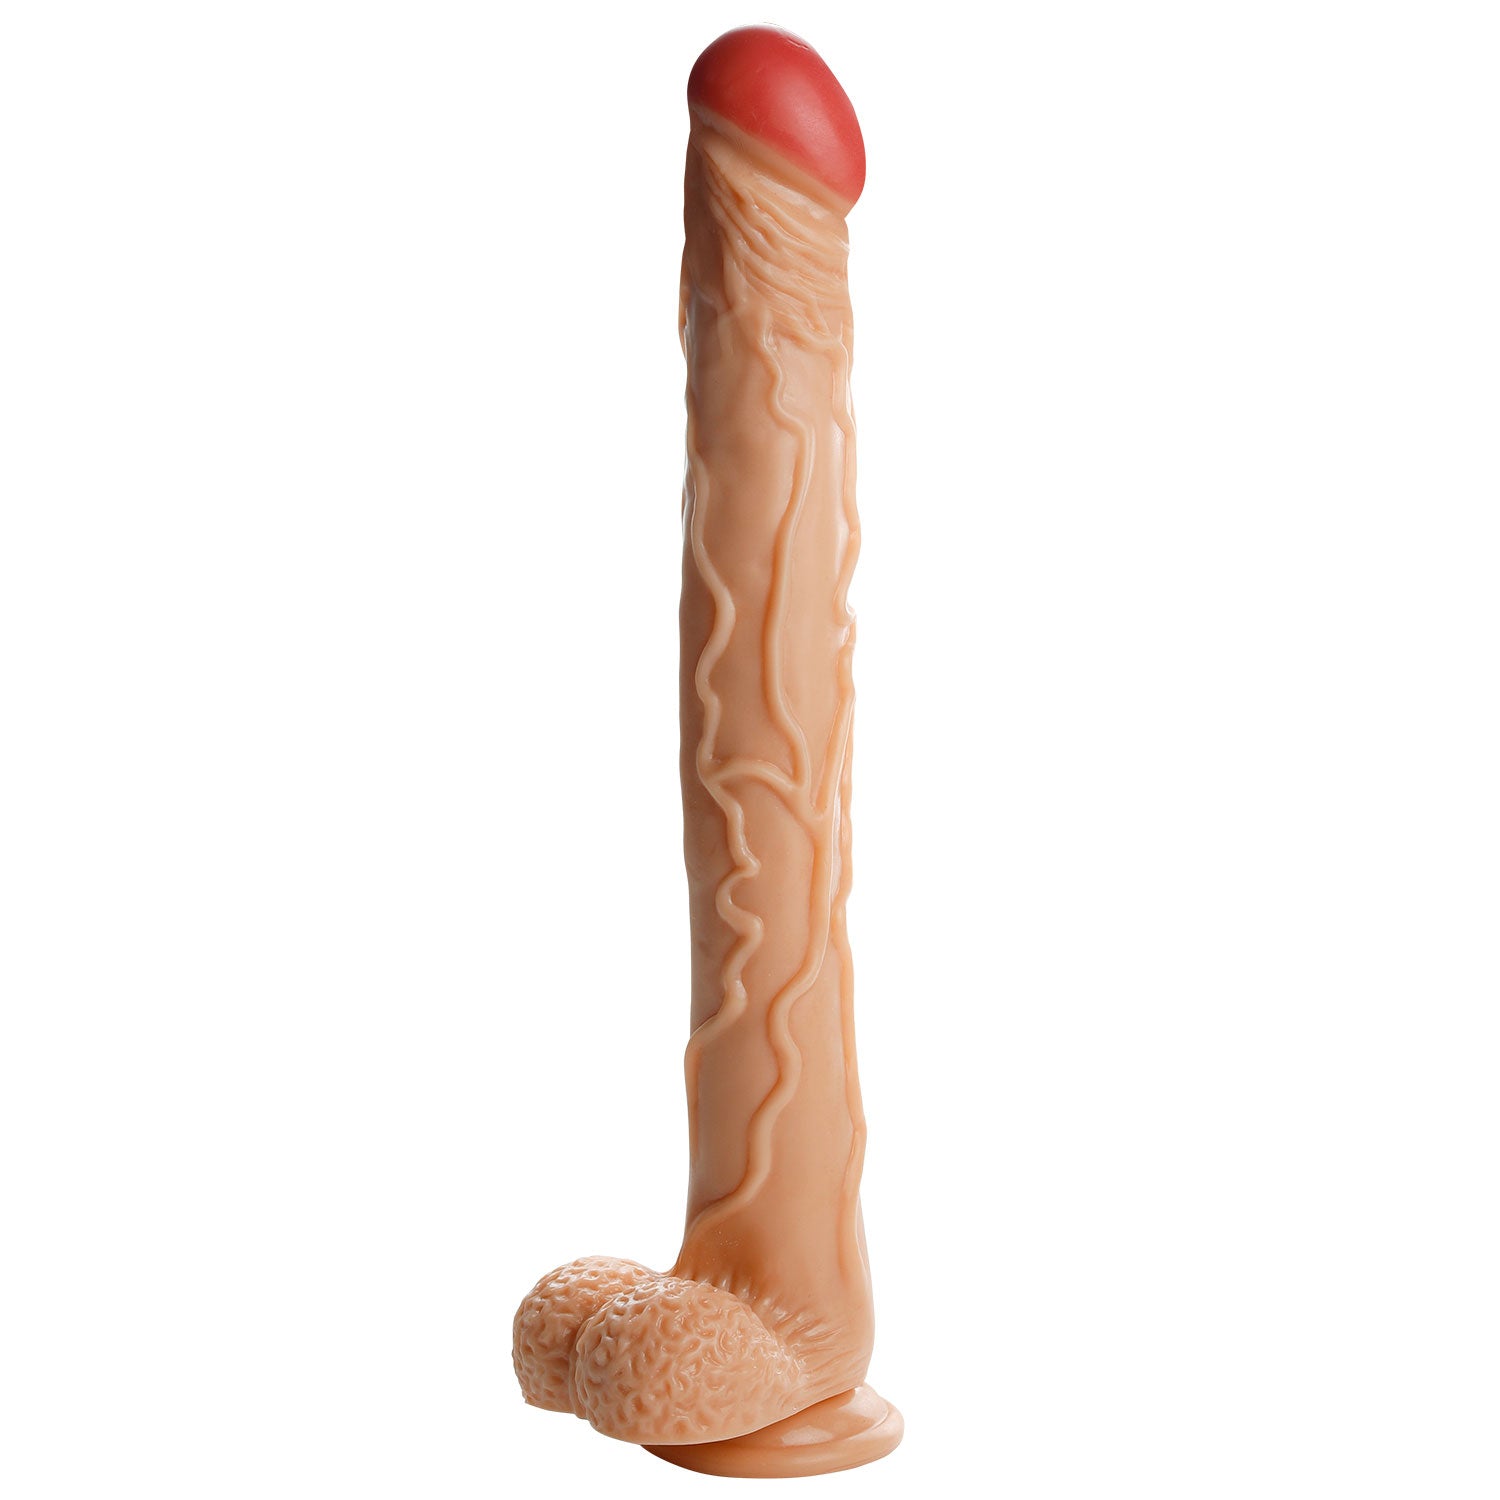 MD Super 41cm Realistic Dildo / Anal Snake - Nude Color